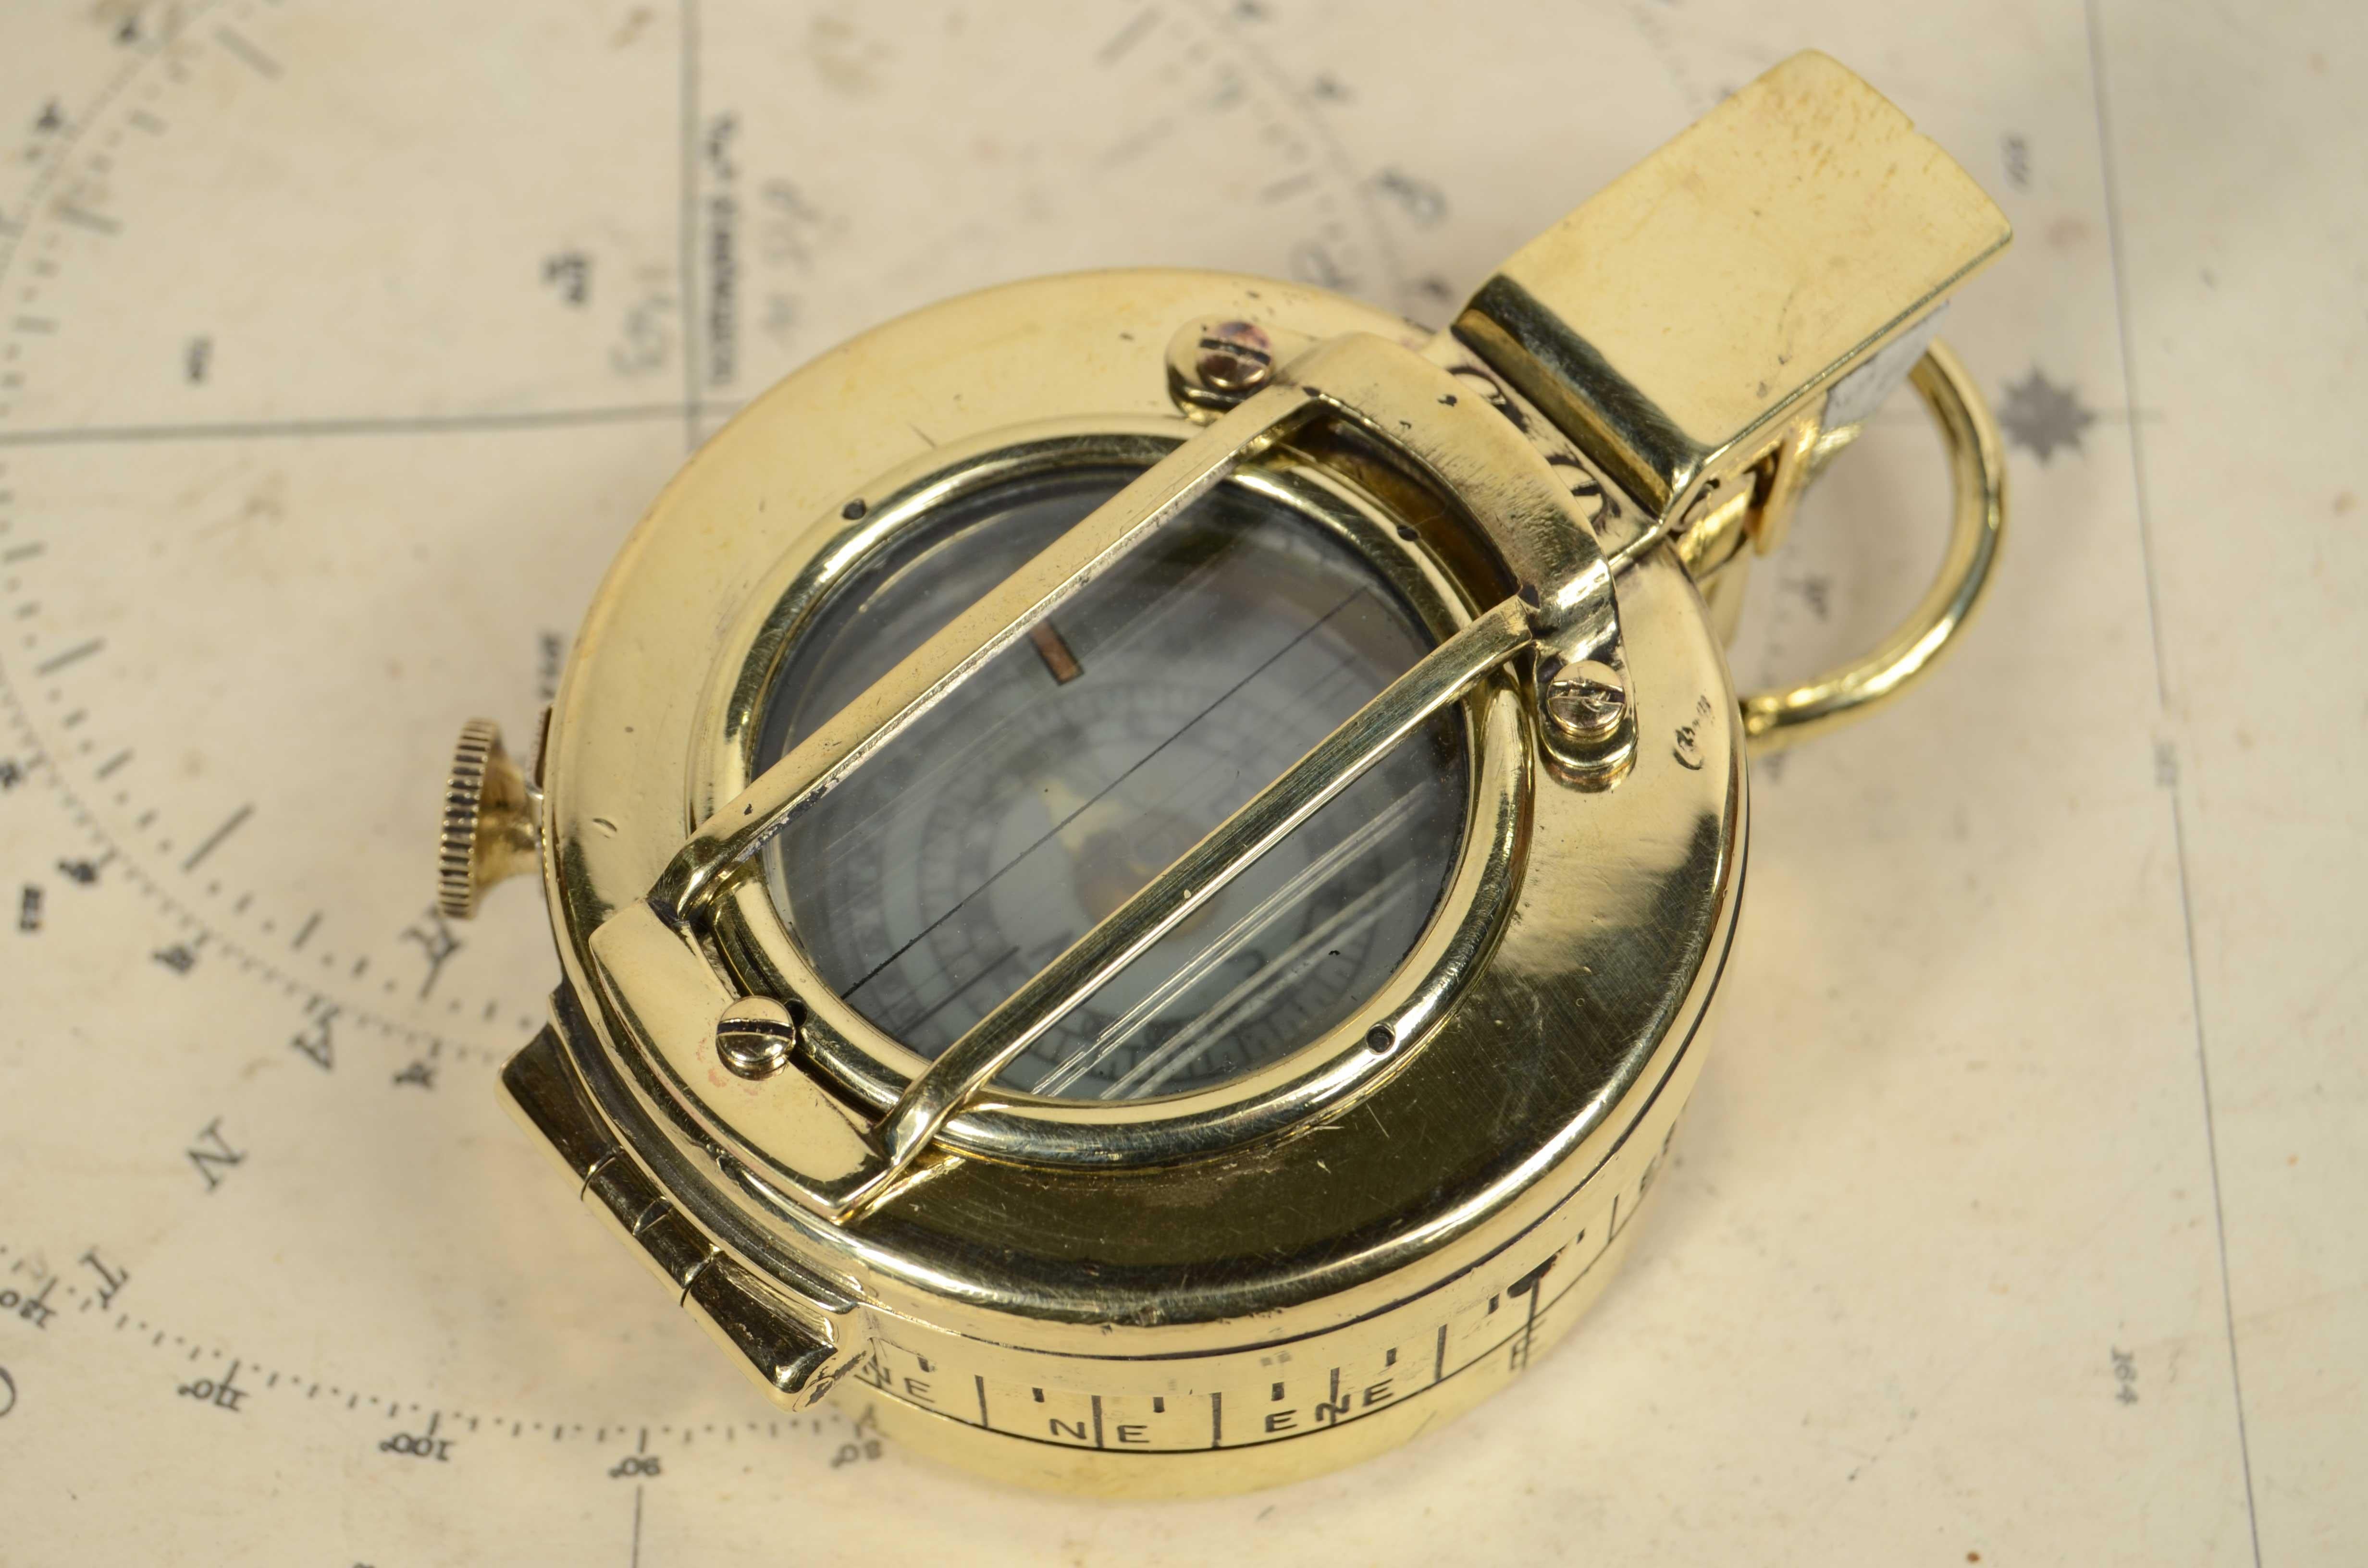 Prismatic compass  by detection signed T.G. Co Ltd London no. B 21681 1940 MK For Sale 9